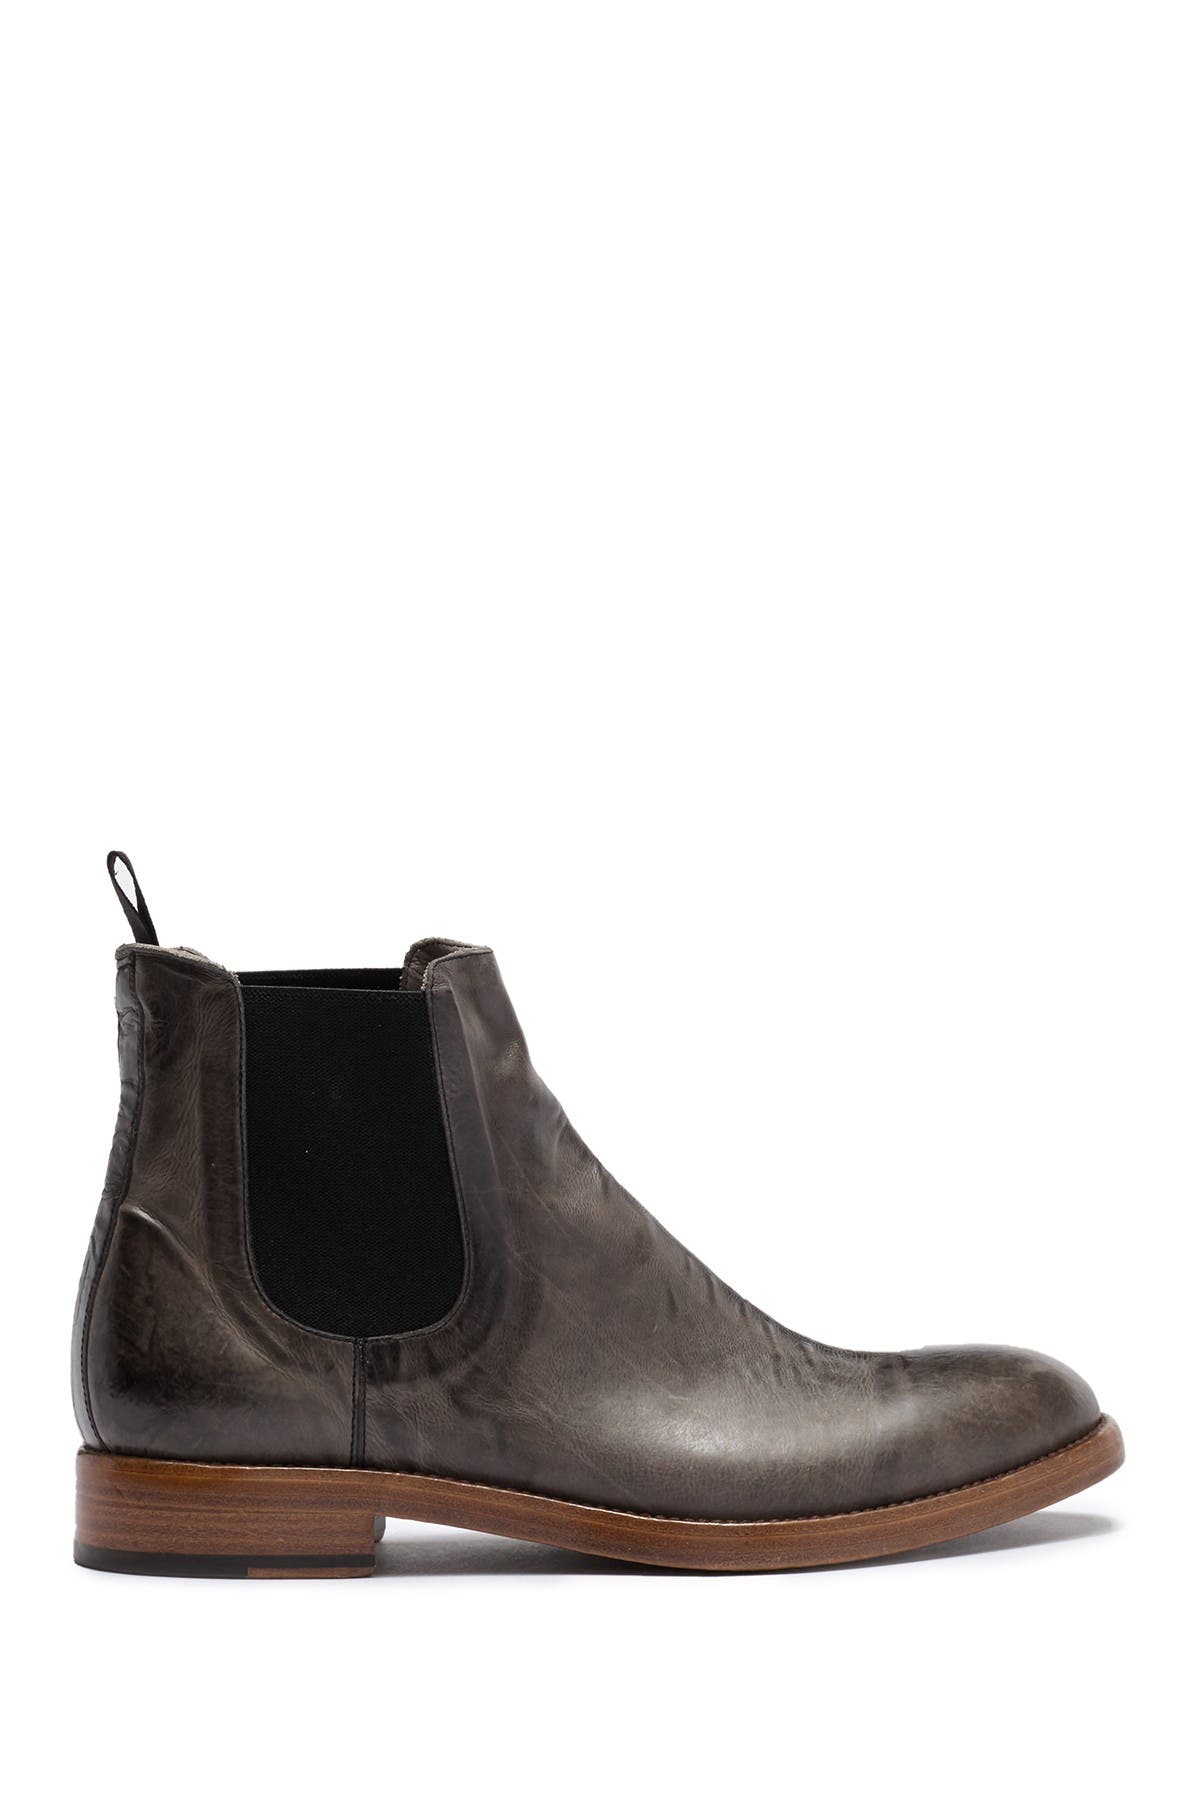 frye chase chelsea boot